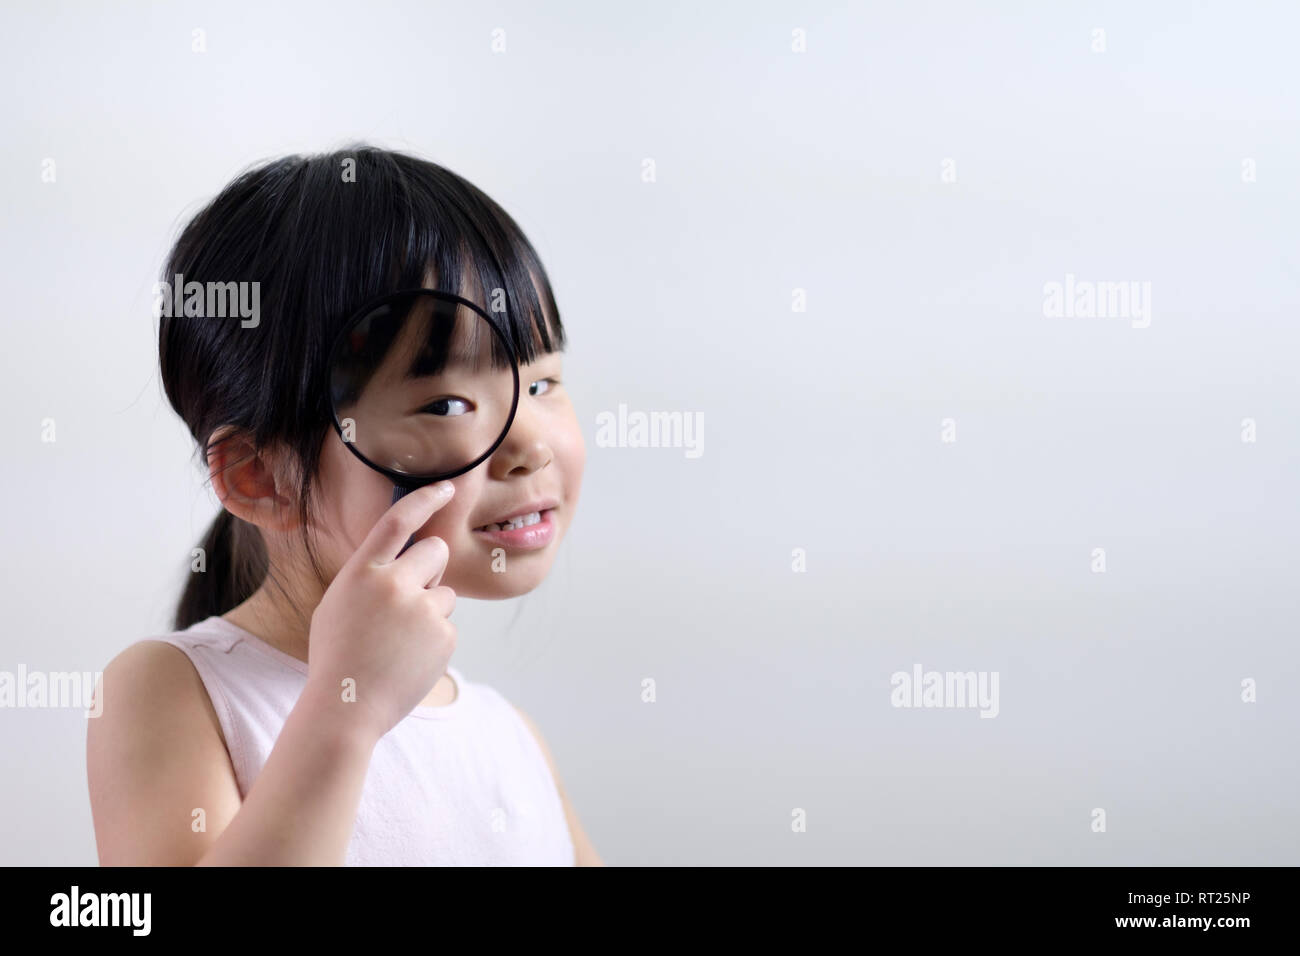 Little girl child looking through a magnifying glass on white background Stock Photo